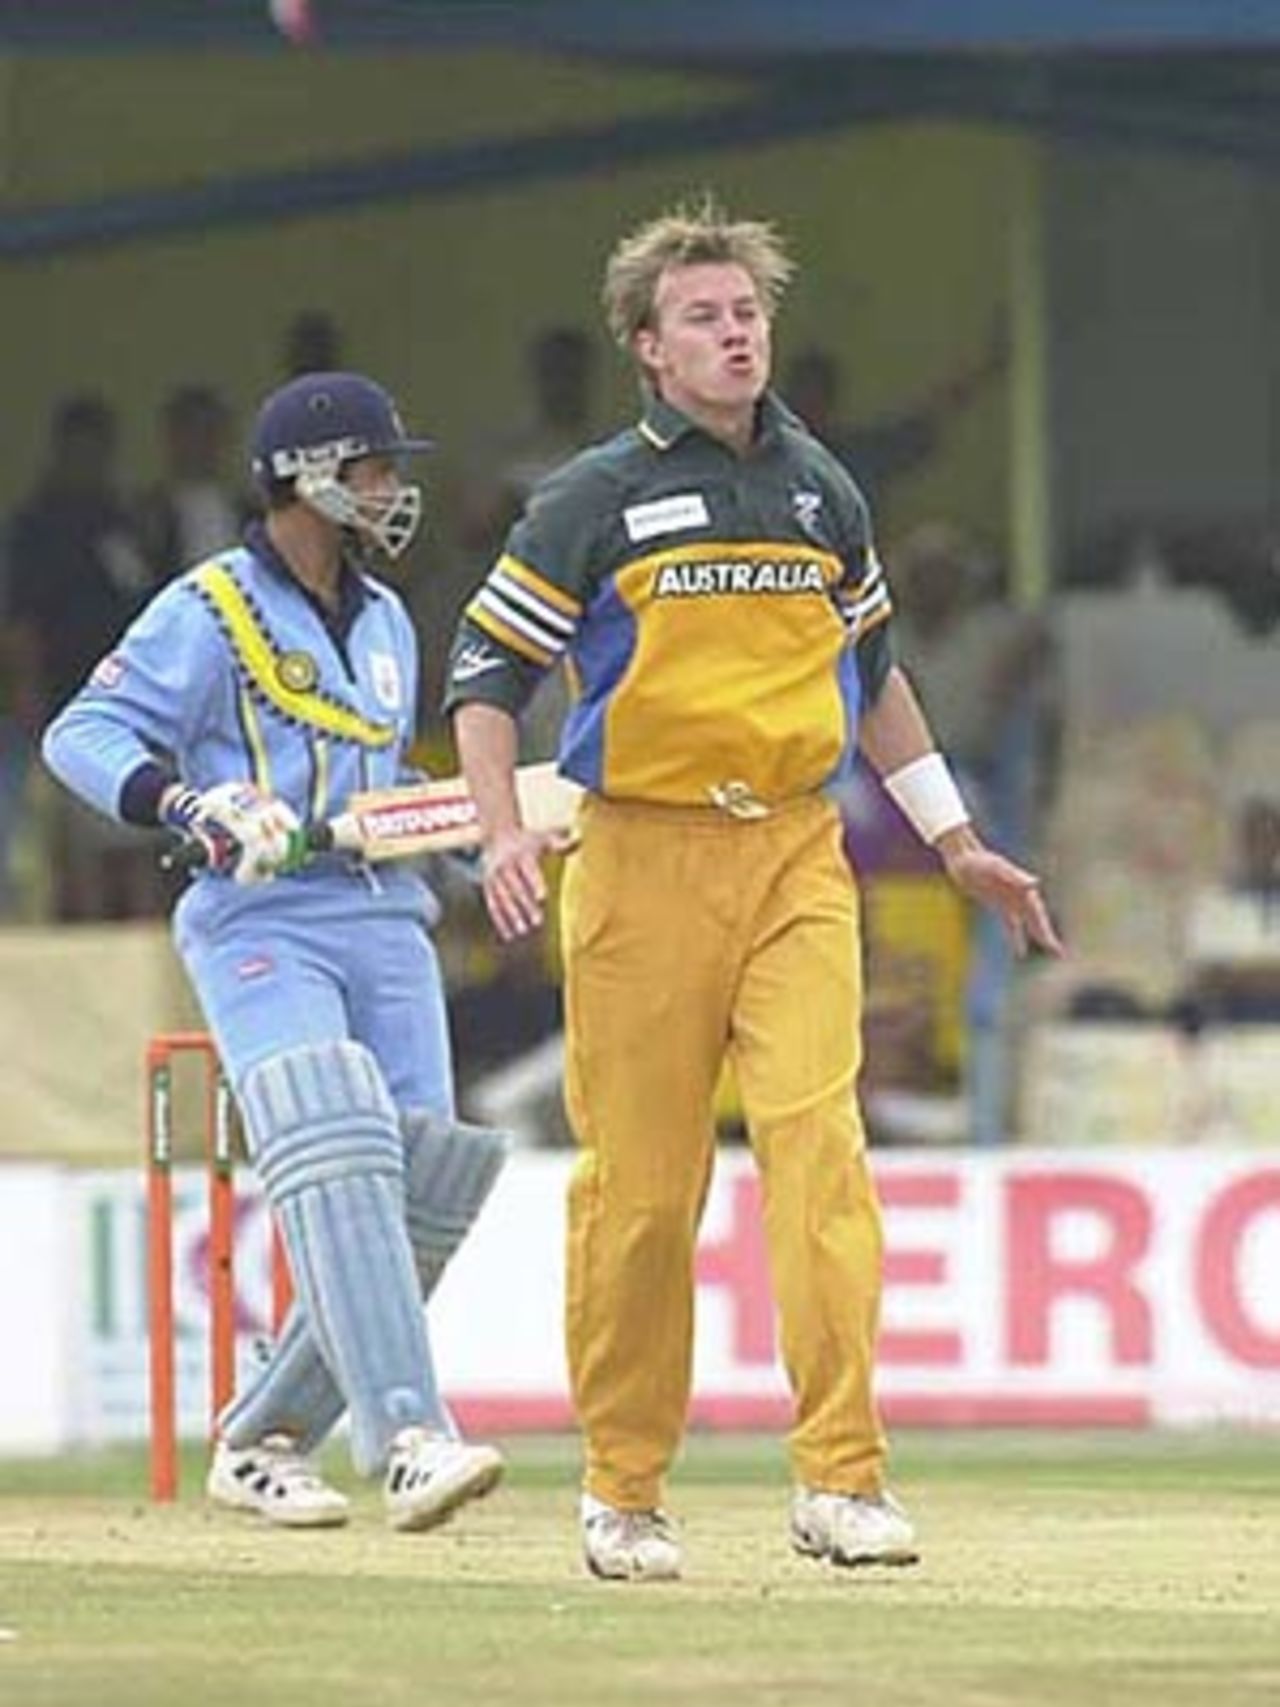 Brett Lee charging in and generating good pace against India, ICC KnockOut, 2000/01, 1st Quarter Final, Australia v India, Gymkhana Club Ground, Nairobi, 07 October 2000.